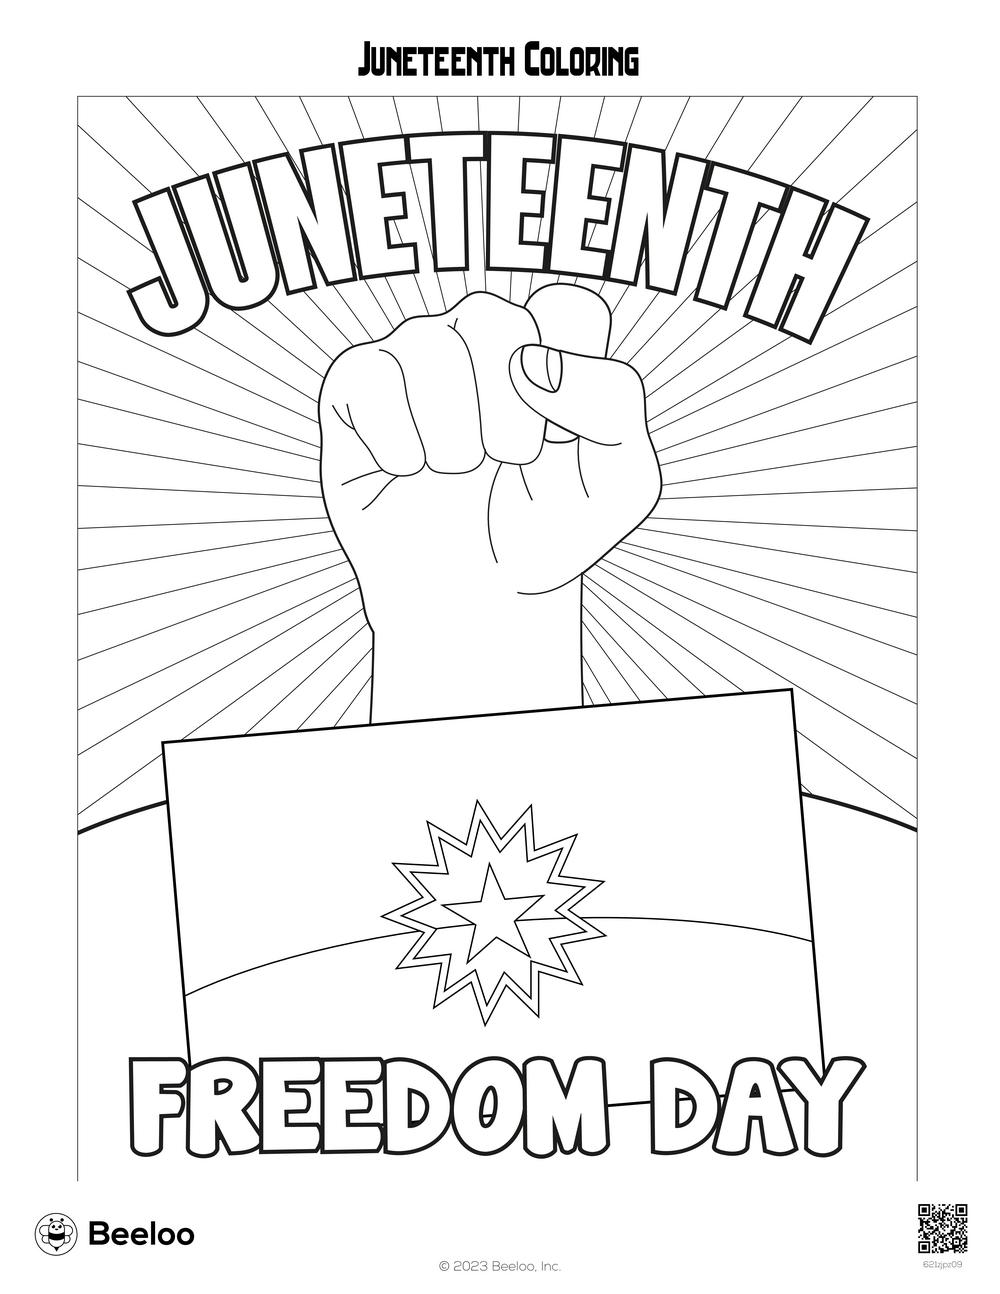 Juneteenth-themed Coloring Pages ...